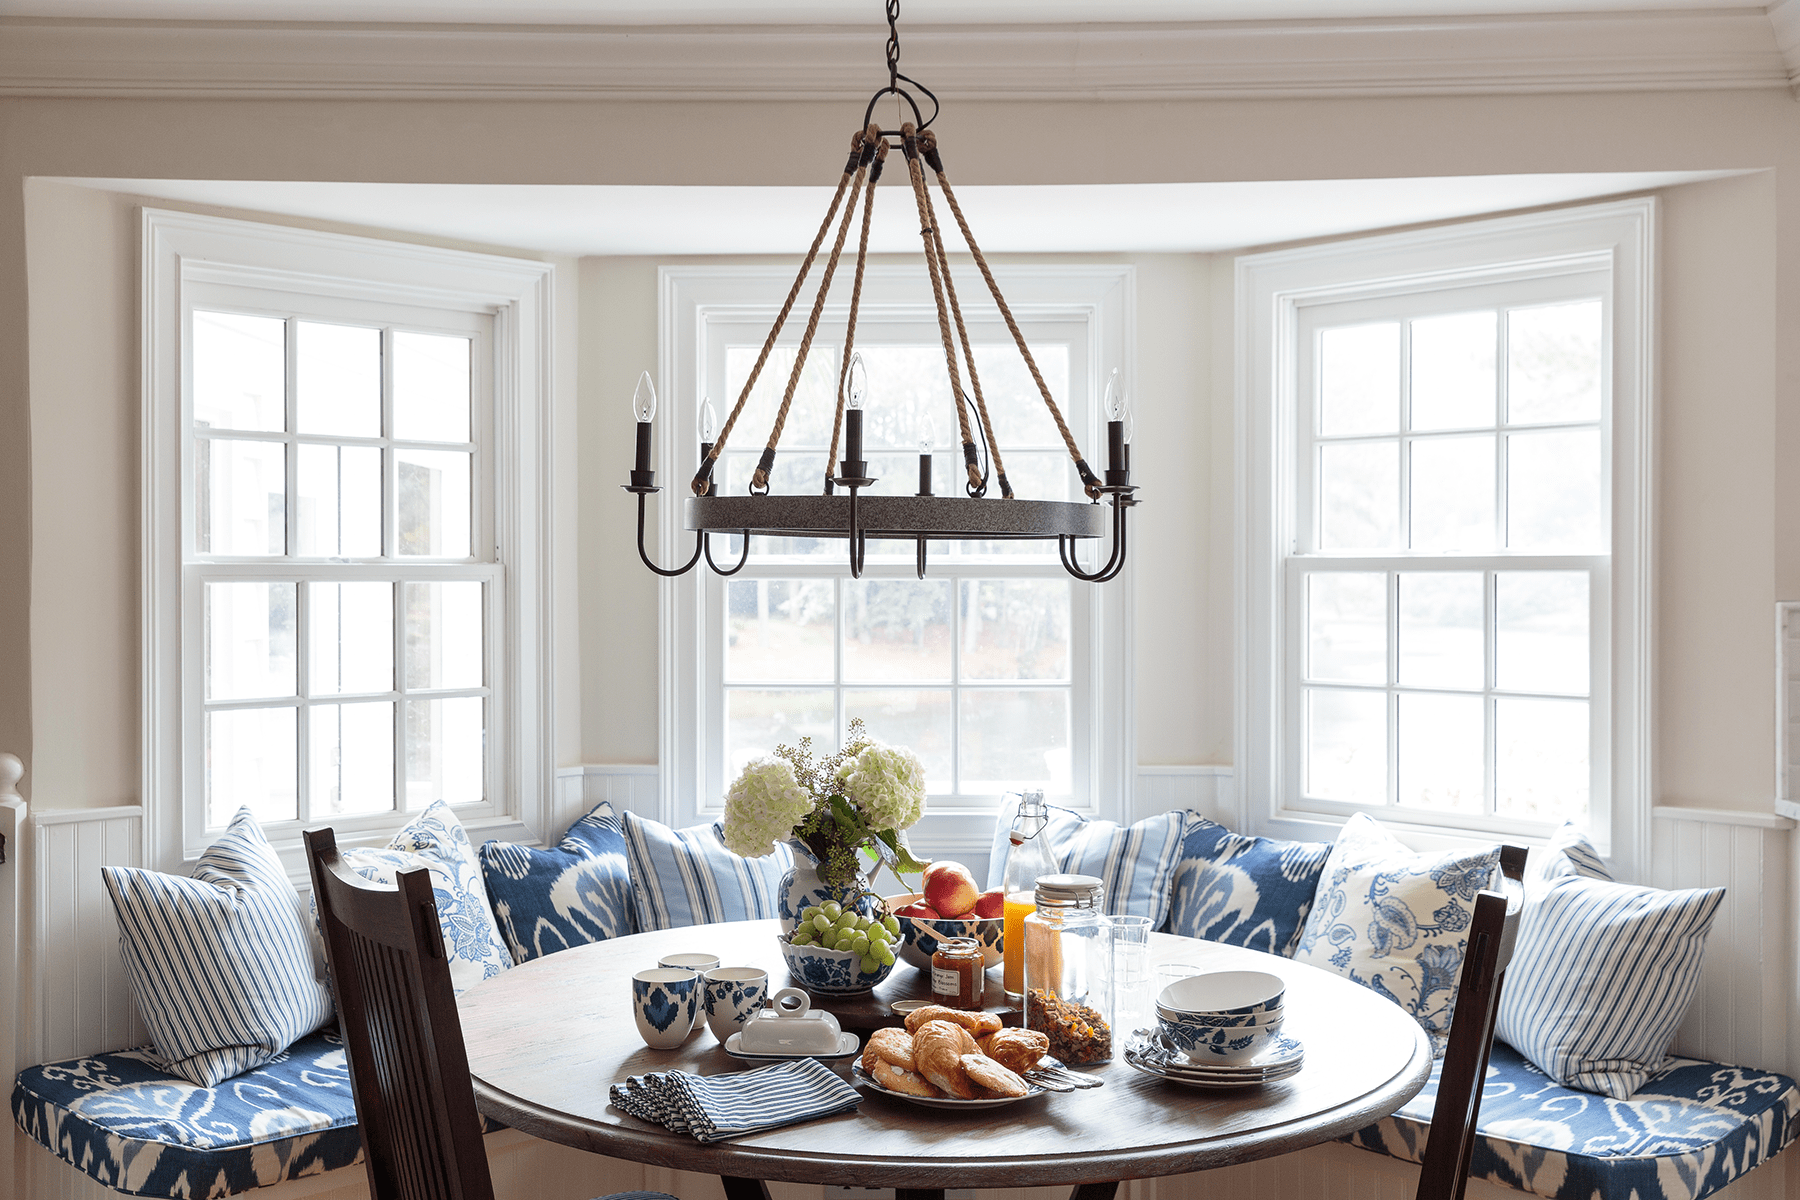 coastal dining room decor by the j banks design group has seaside-inspired colors as its foundation